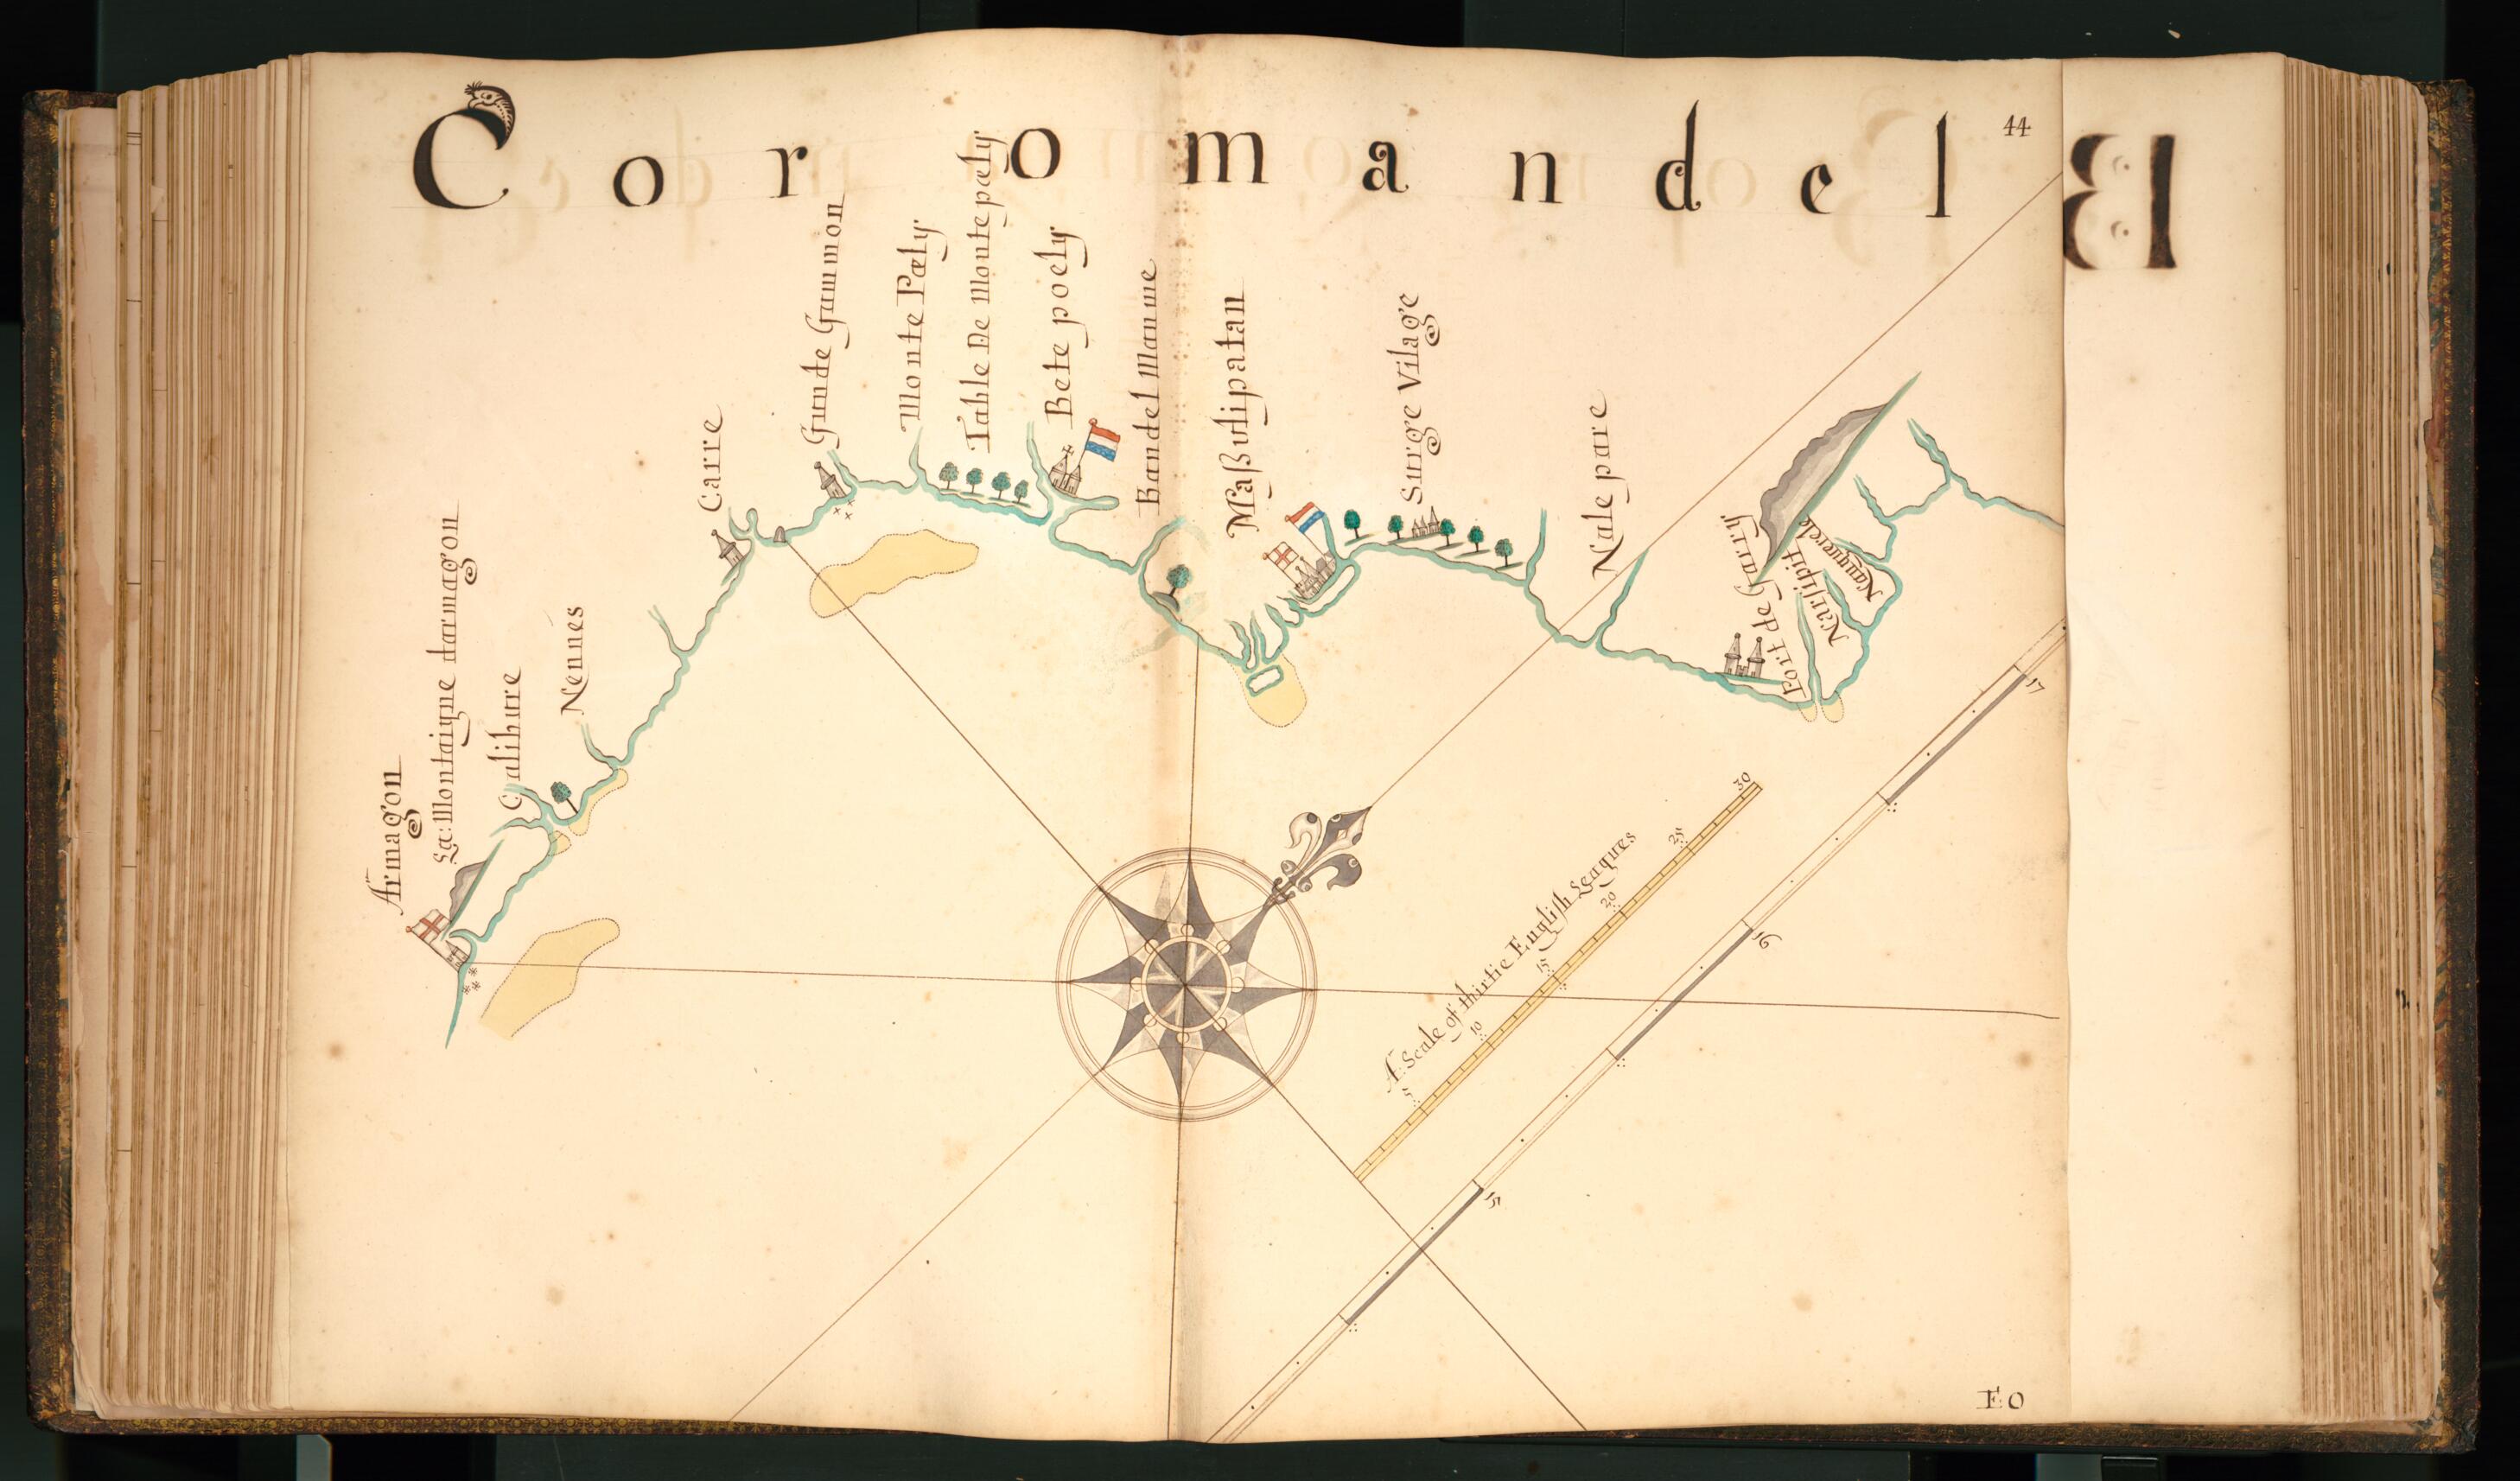 This old map of 44) Coramandel from Buccaneer Atlas from 1690 was created by William Hacke in 1690